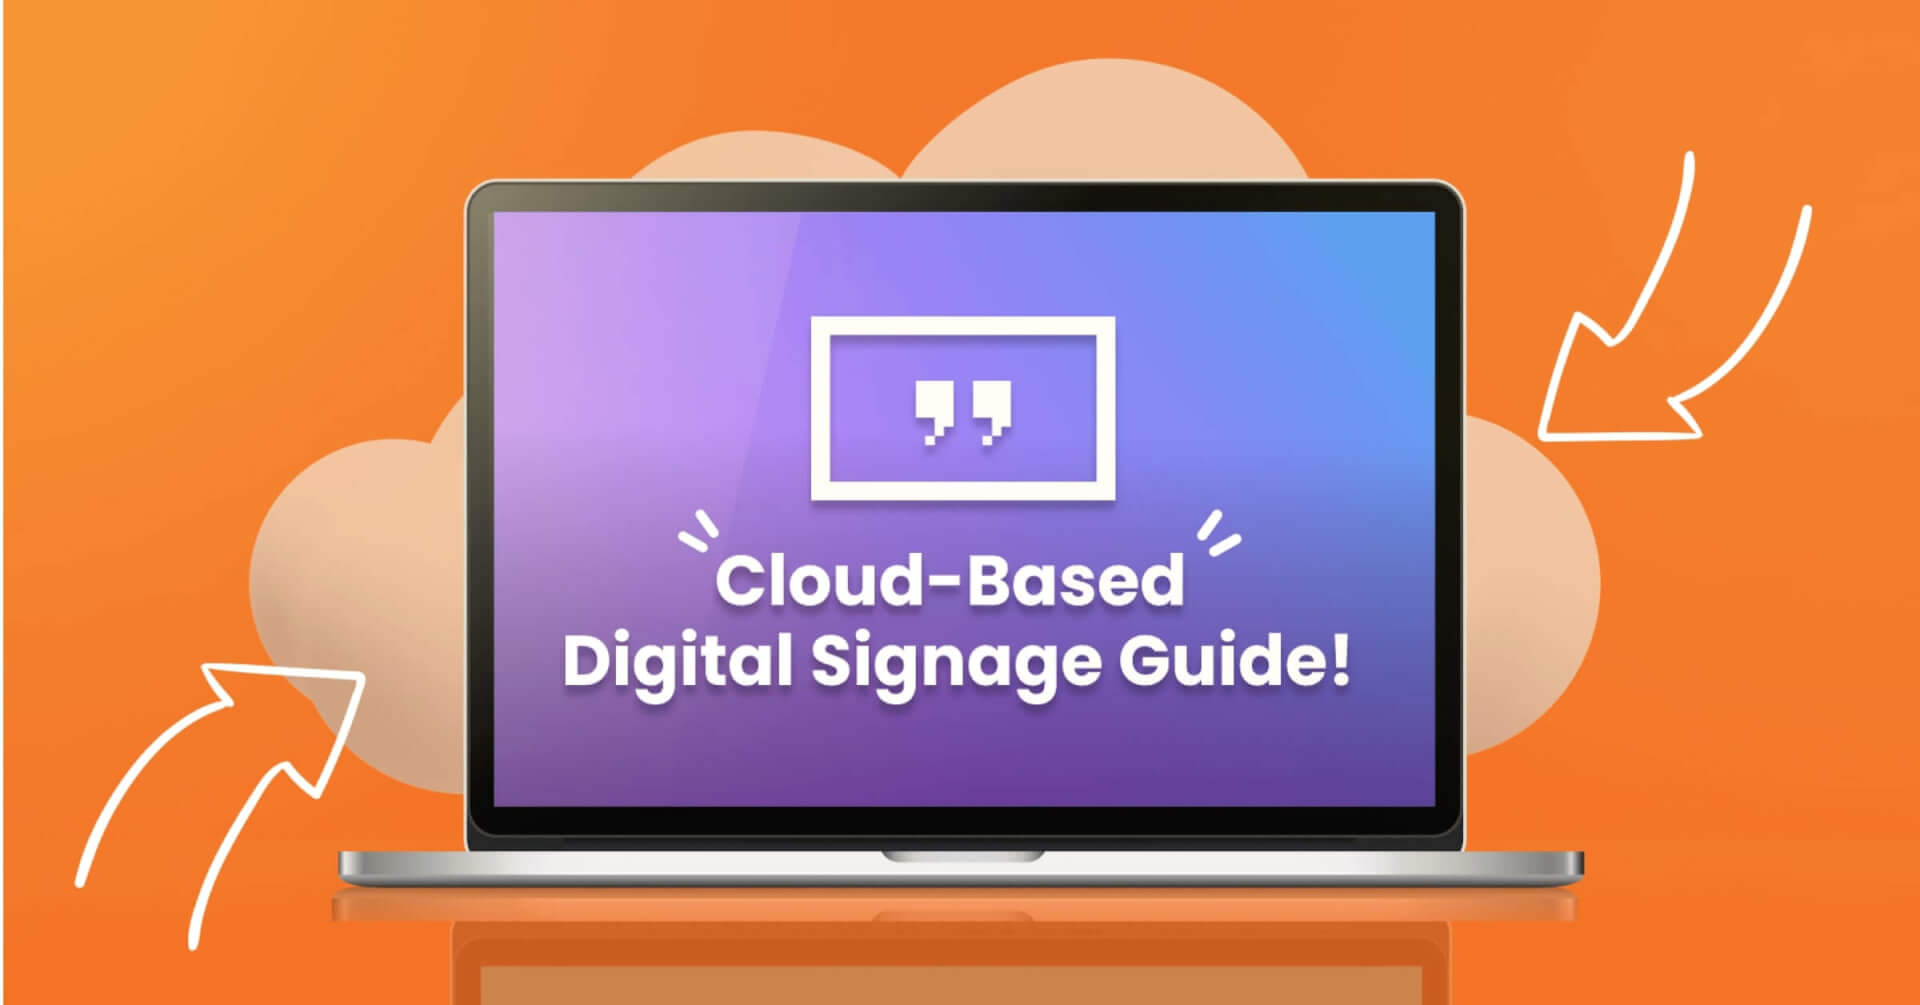 Guide for cloud-based digital signage software, players and screens